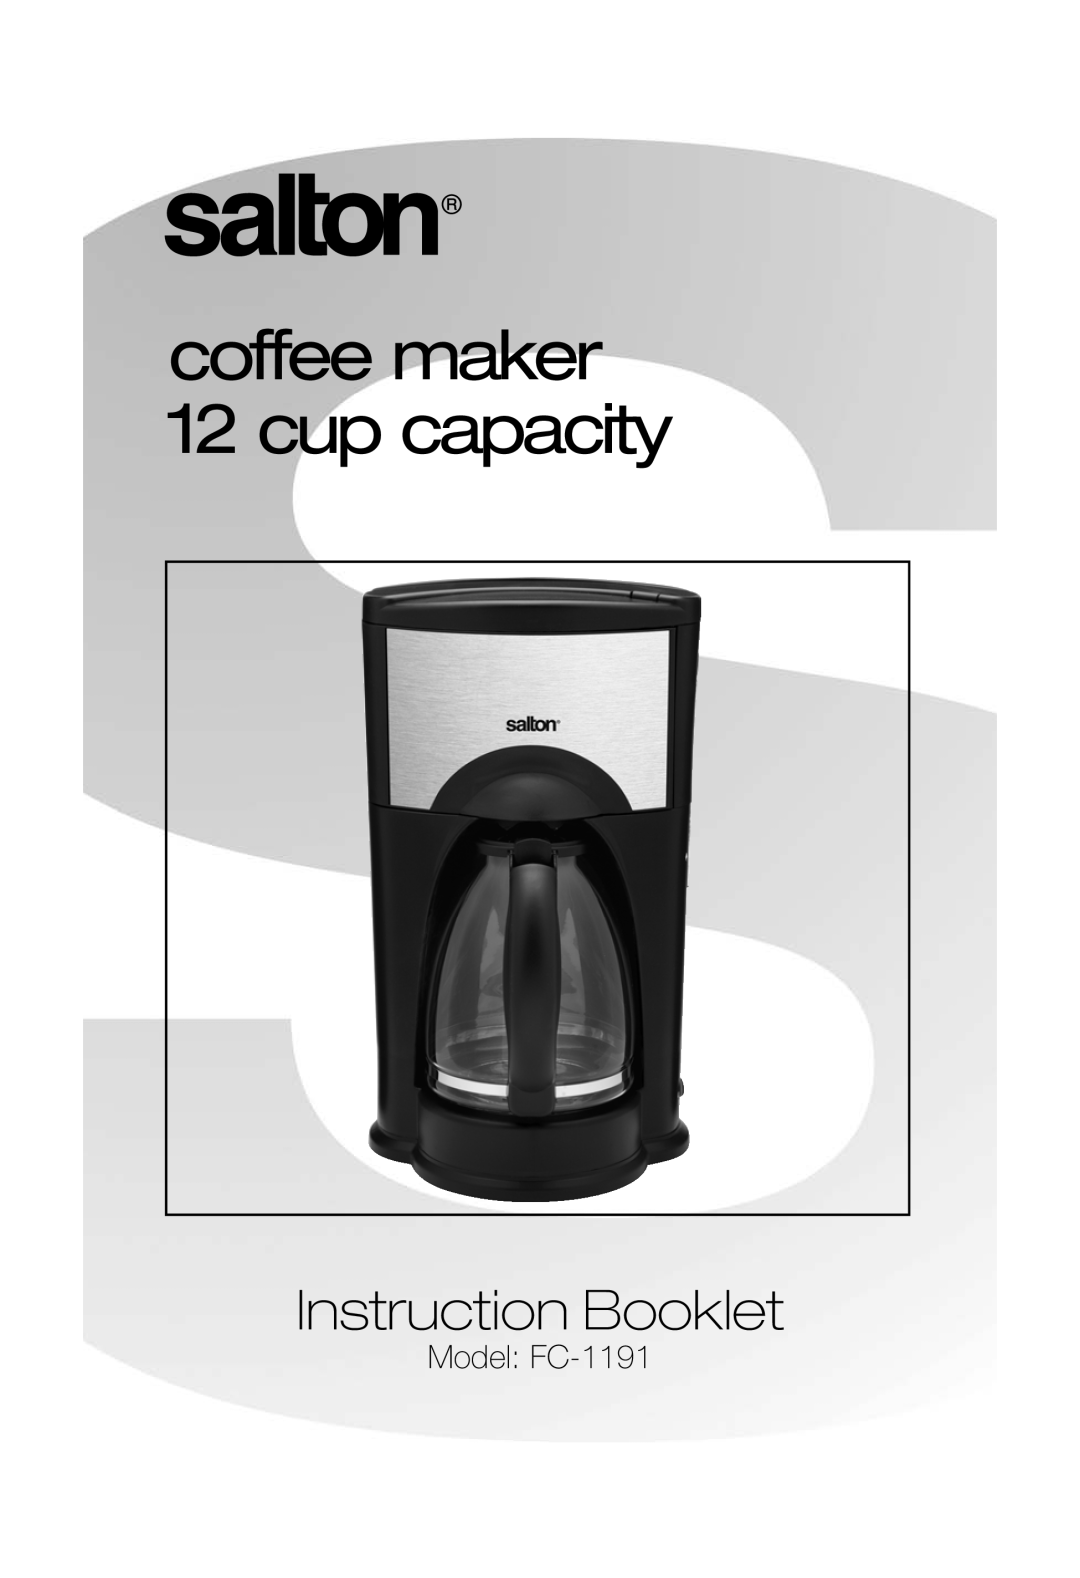 Salton manual coffee maker 12 cup capacity, Instruction Booklet, Model FC-1191 